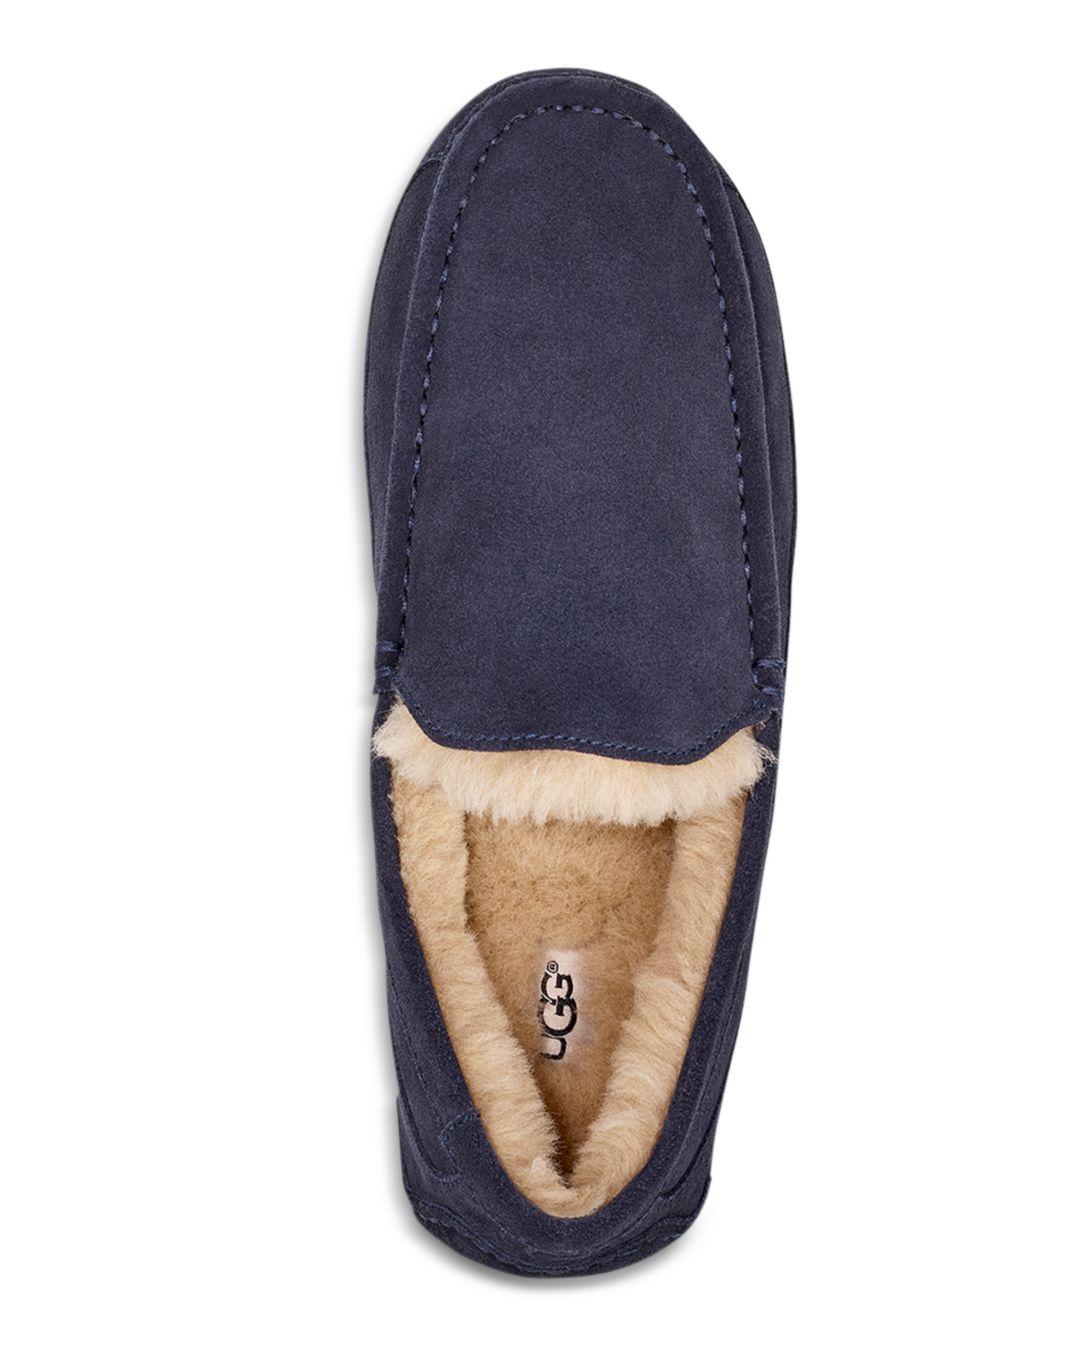 UGG Suede Men's Ascot Moc Toe Slippers in Blue for Men - Lyst